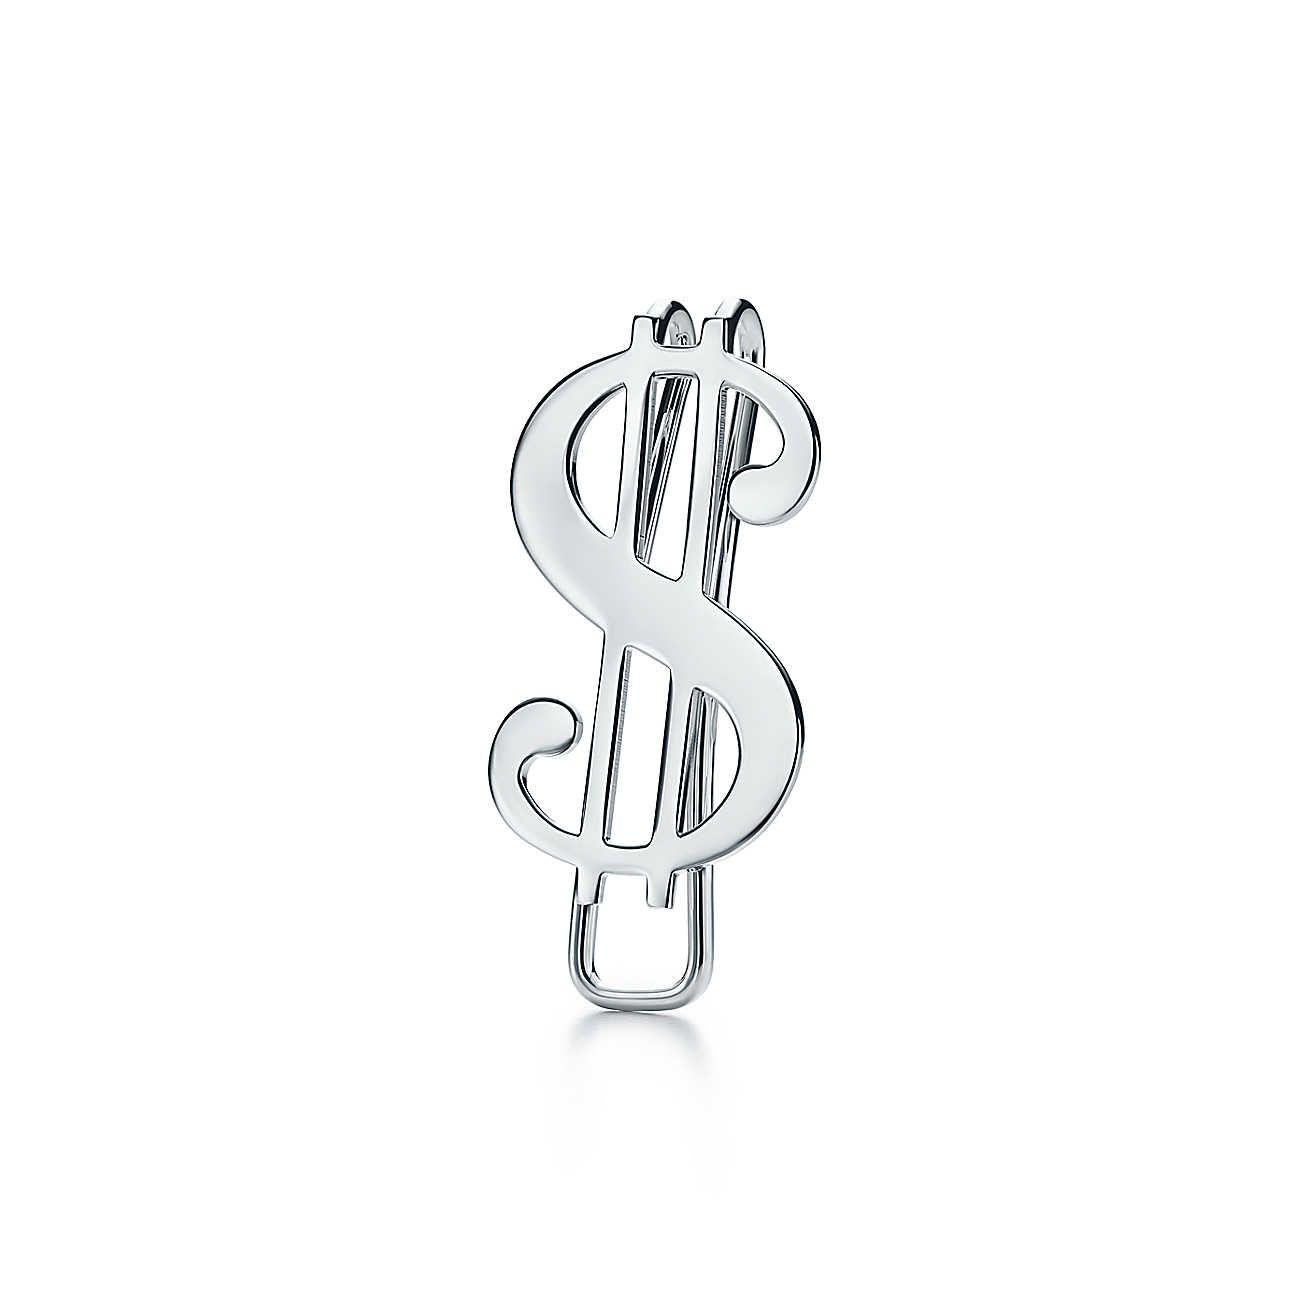 Black and White Retirement Logo - Out of Retirement dollar sign money clip in sterling silver ...